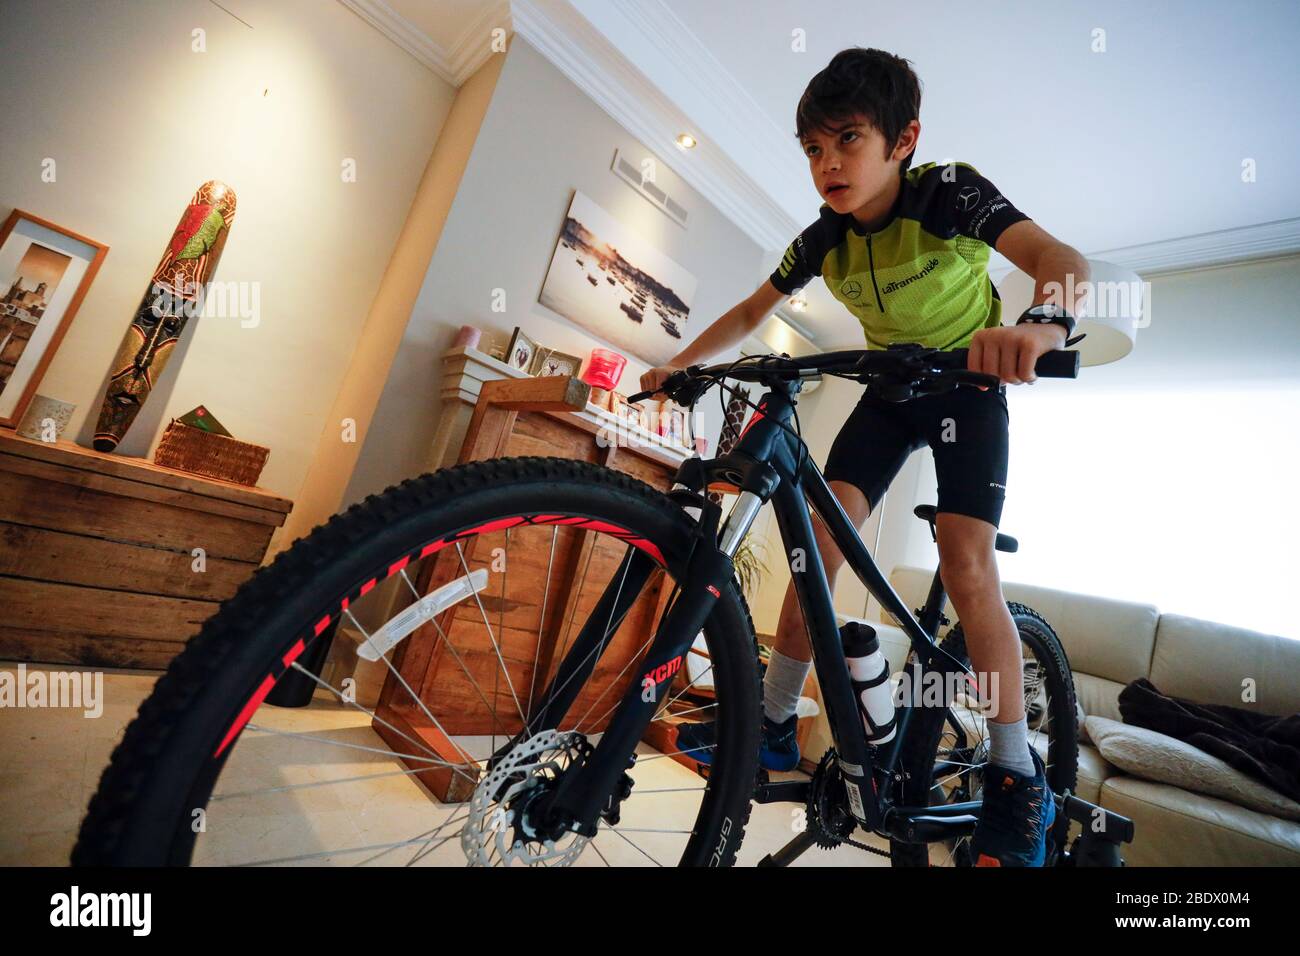 Boy riding bike on a trainer whilst watching television in his house during Covid19 confinement in Girona, Catalonia, Spain Stock Photo